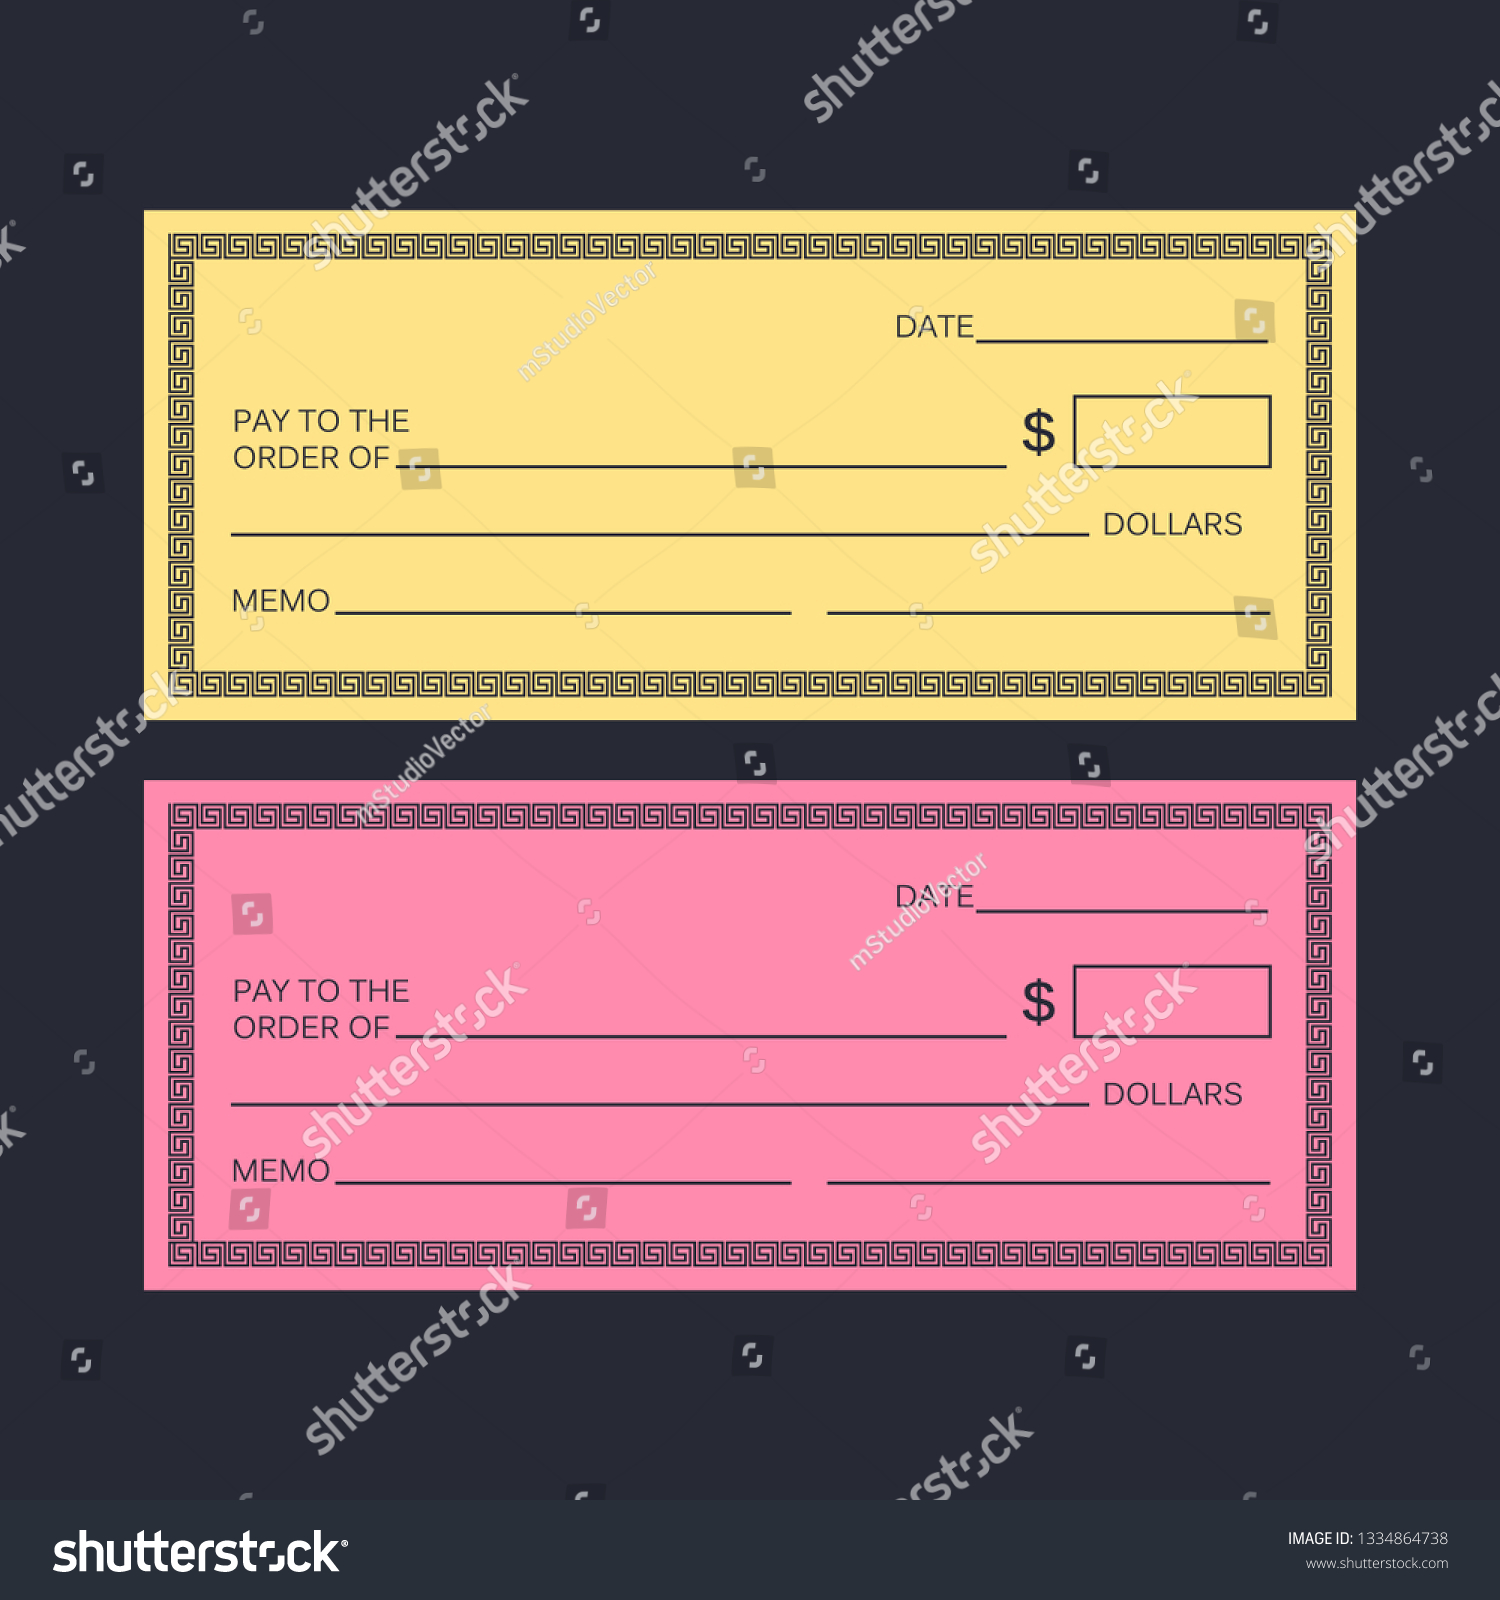 Blank check template. Check template. Banking check template #1334864738